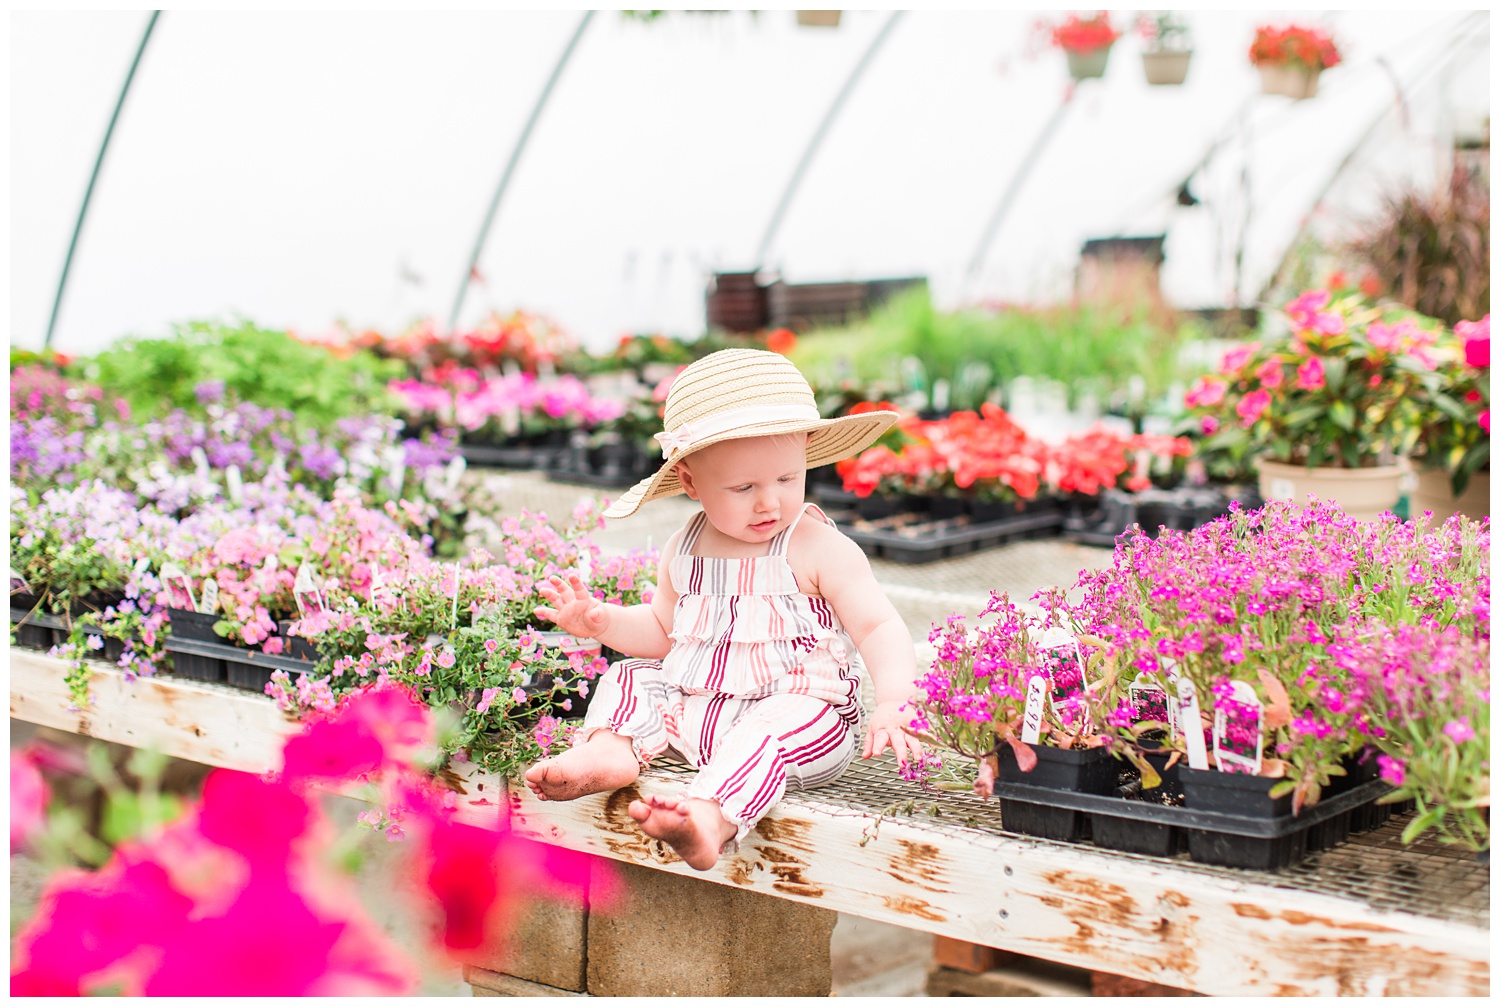 Baby Ivy sitting among florals in a greenhouse wearing a fun floppy hat.